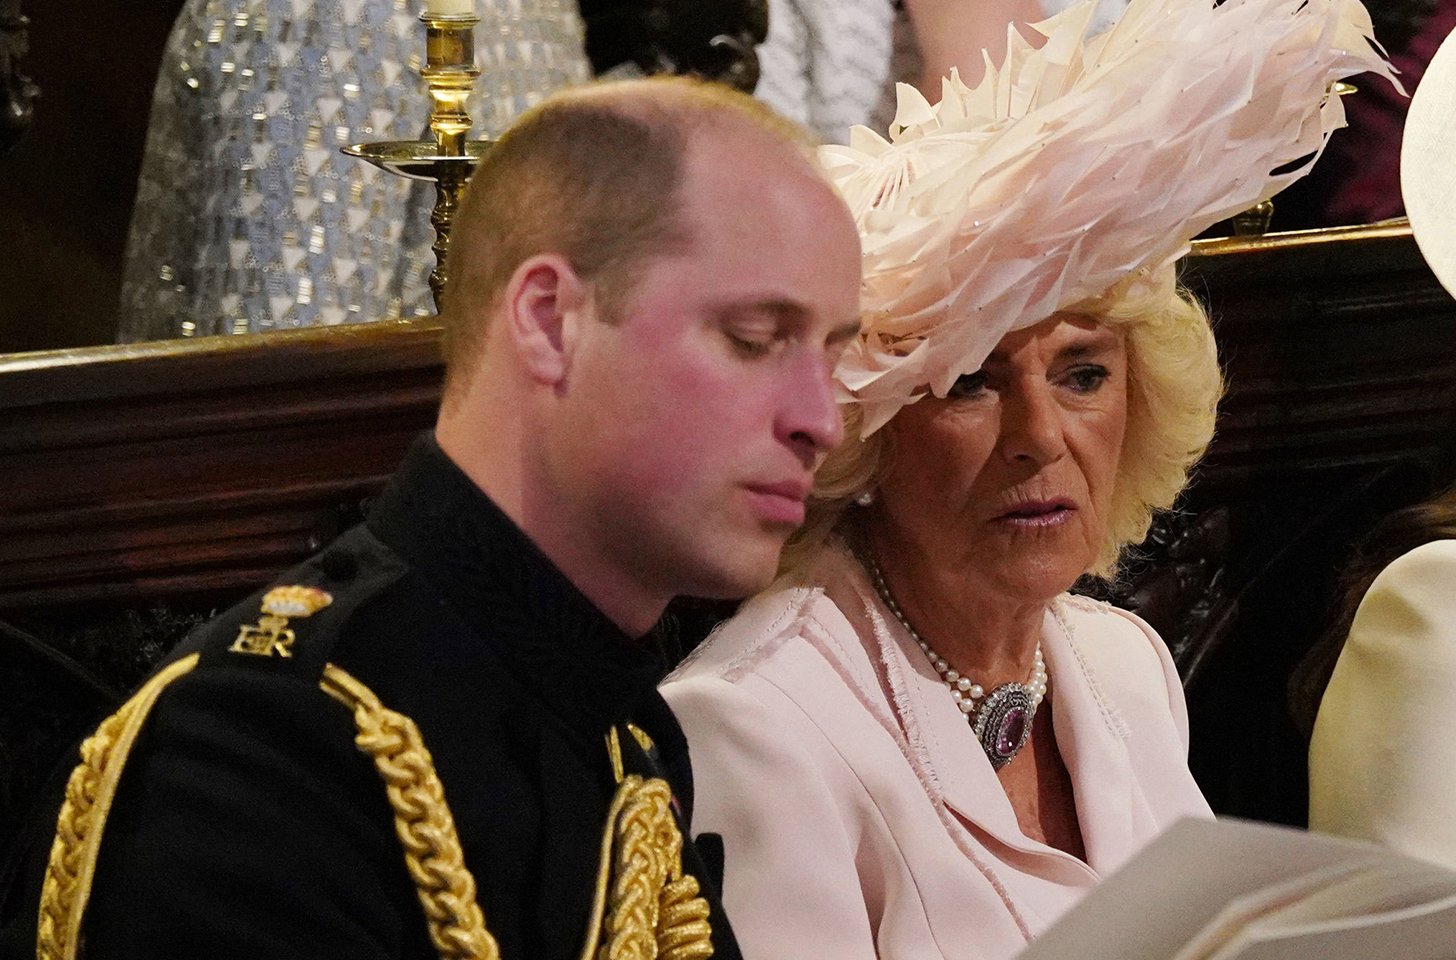 Prince William fighting with Camilla Parker Bowles. The Crown Disrespects Princess Diana.